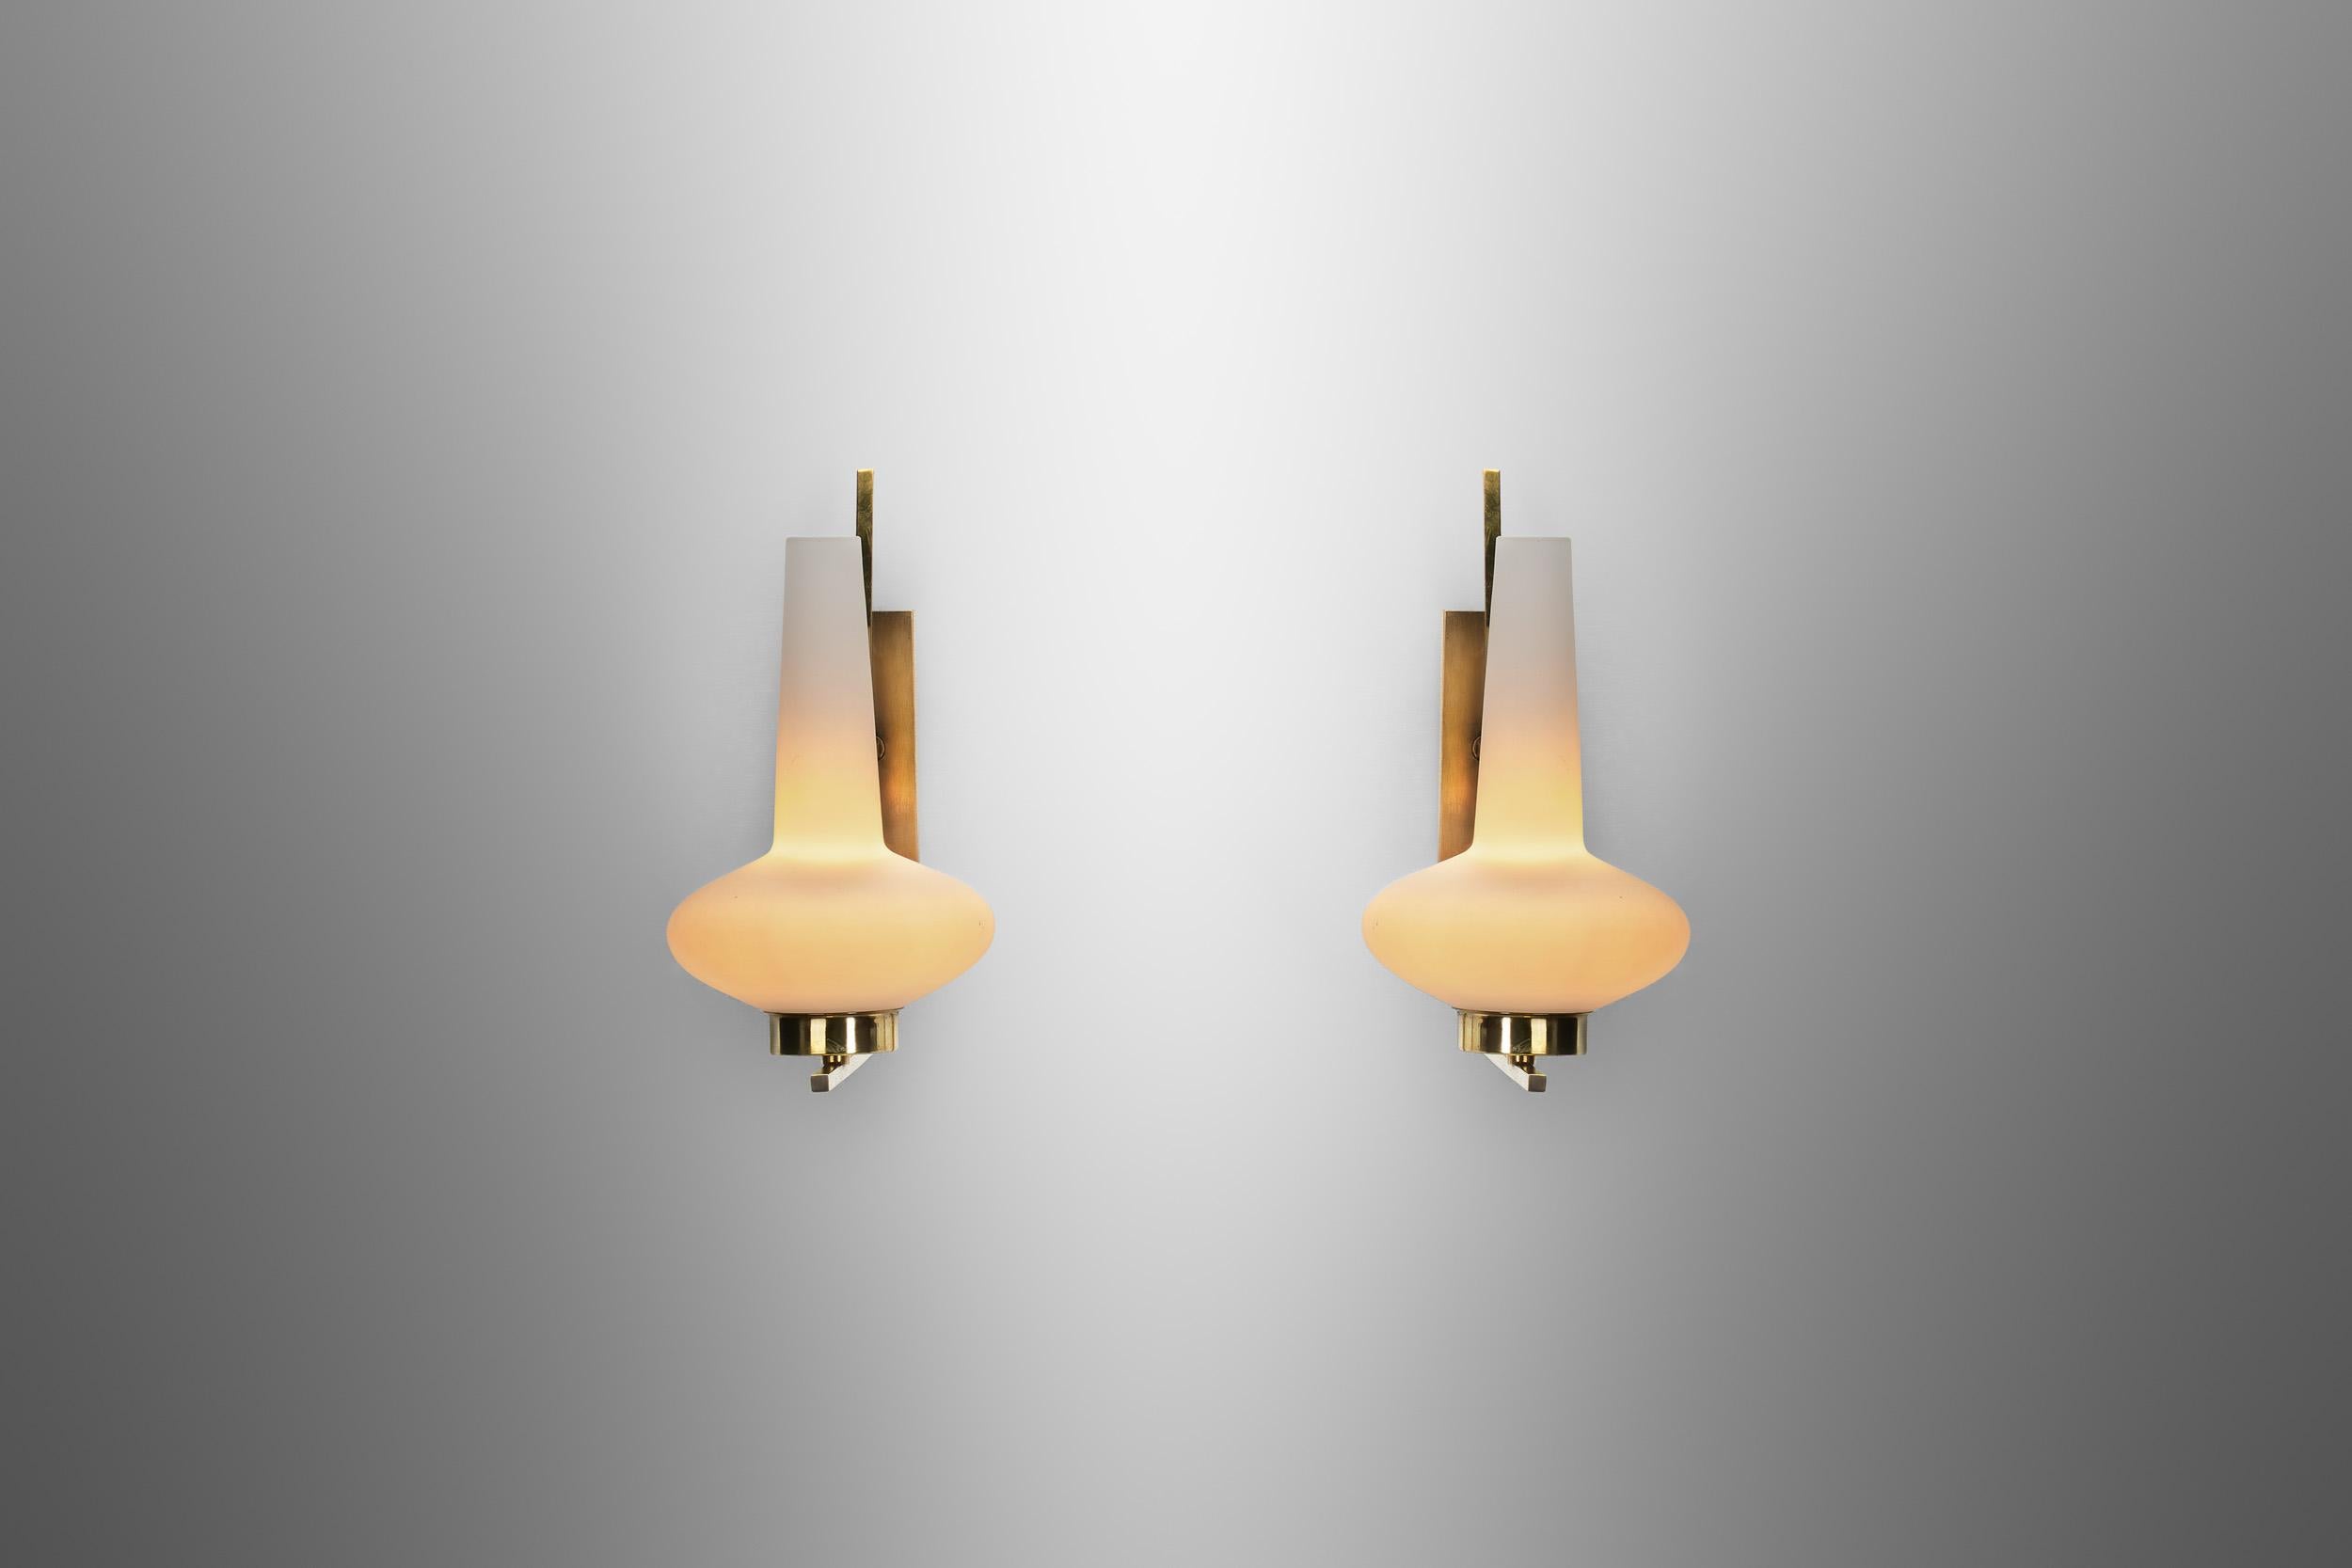 Italian Mid-Century Modern Brass Wall Lamps, Italy, 1950s For Sale 2